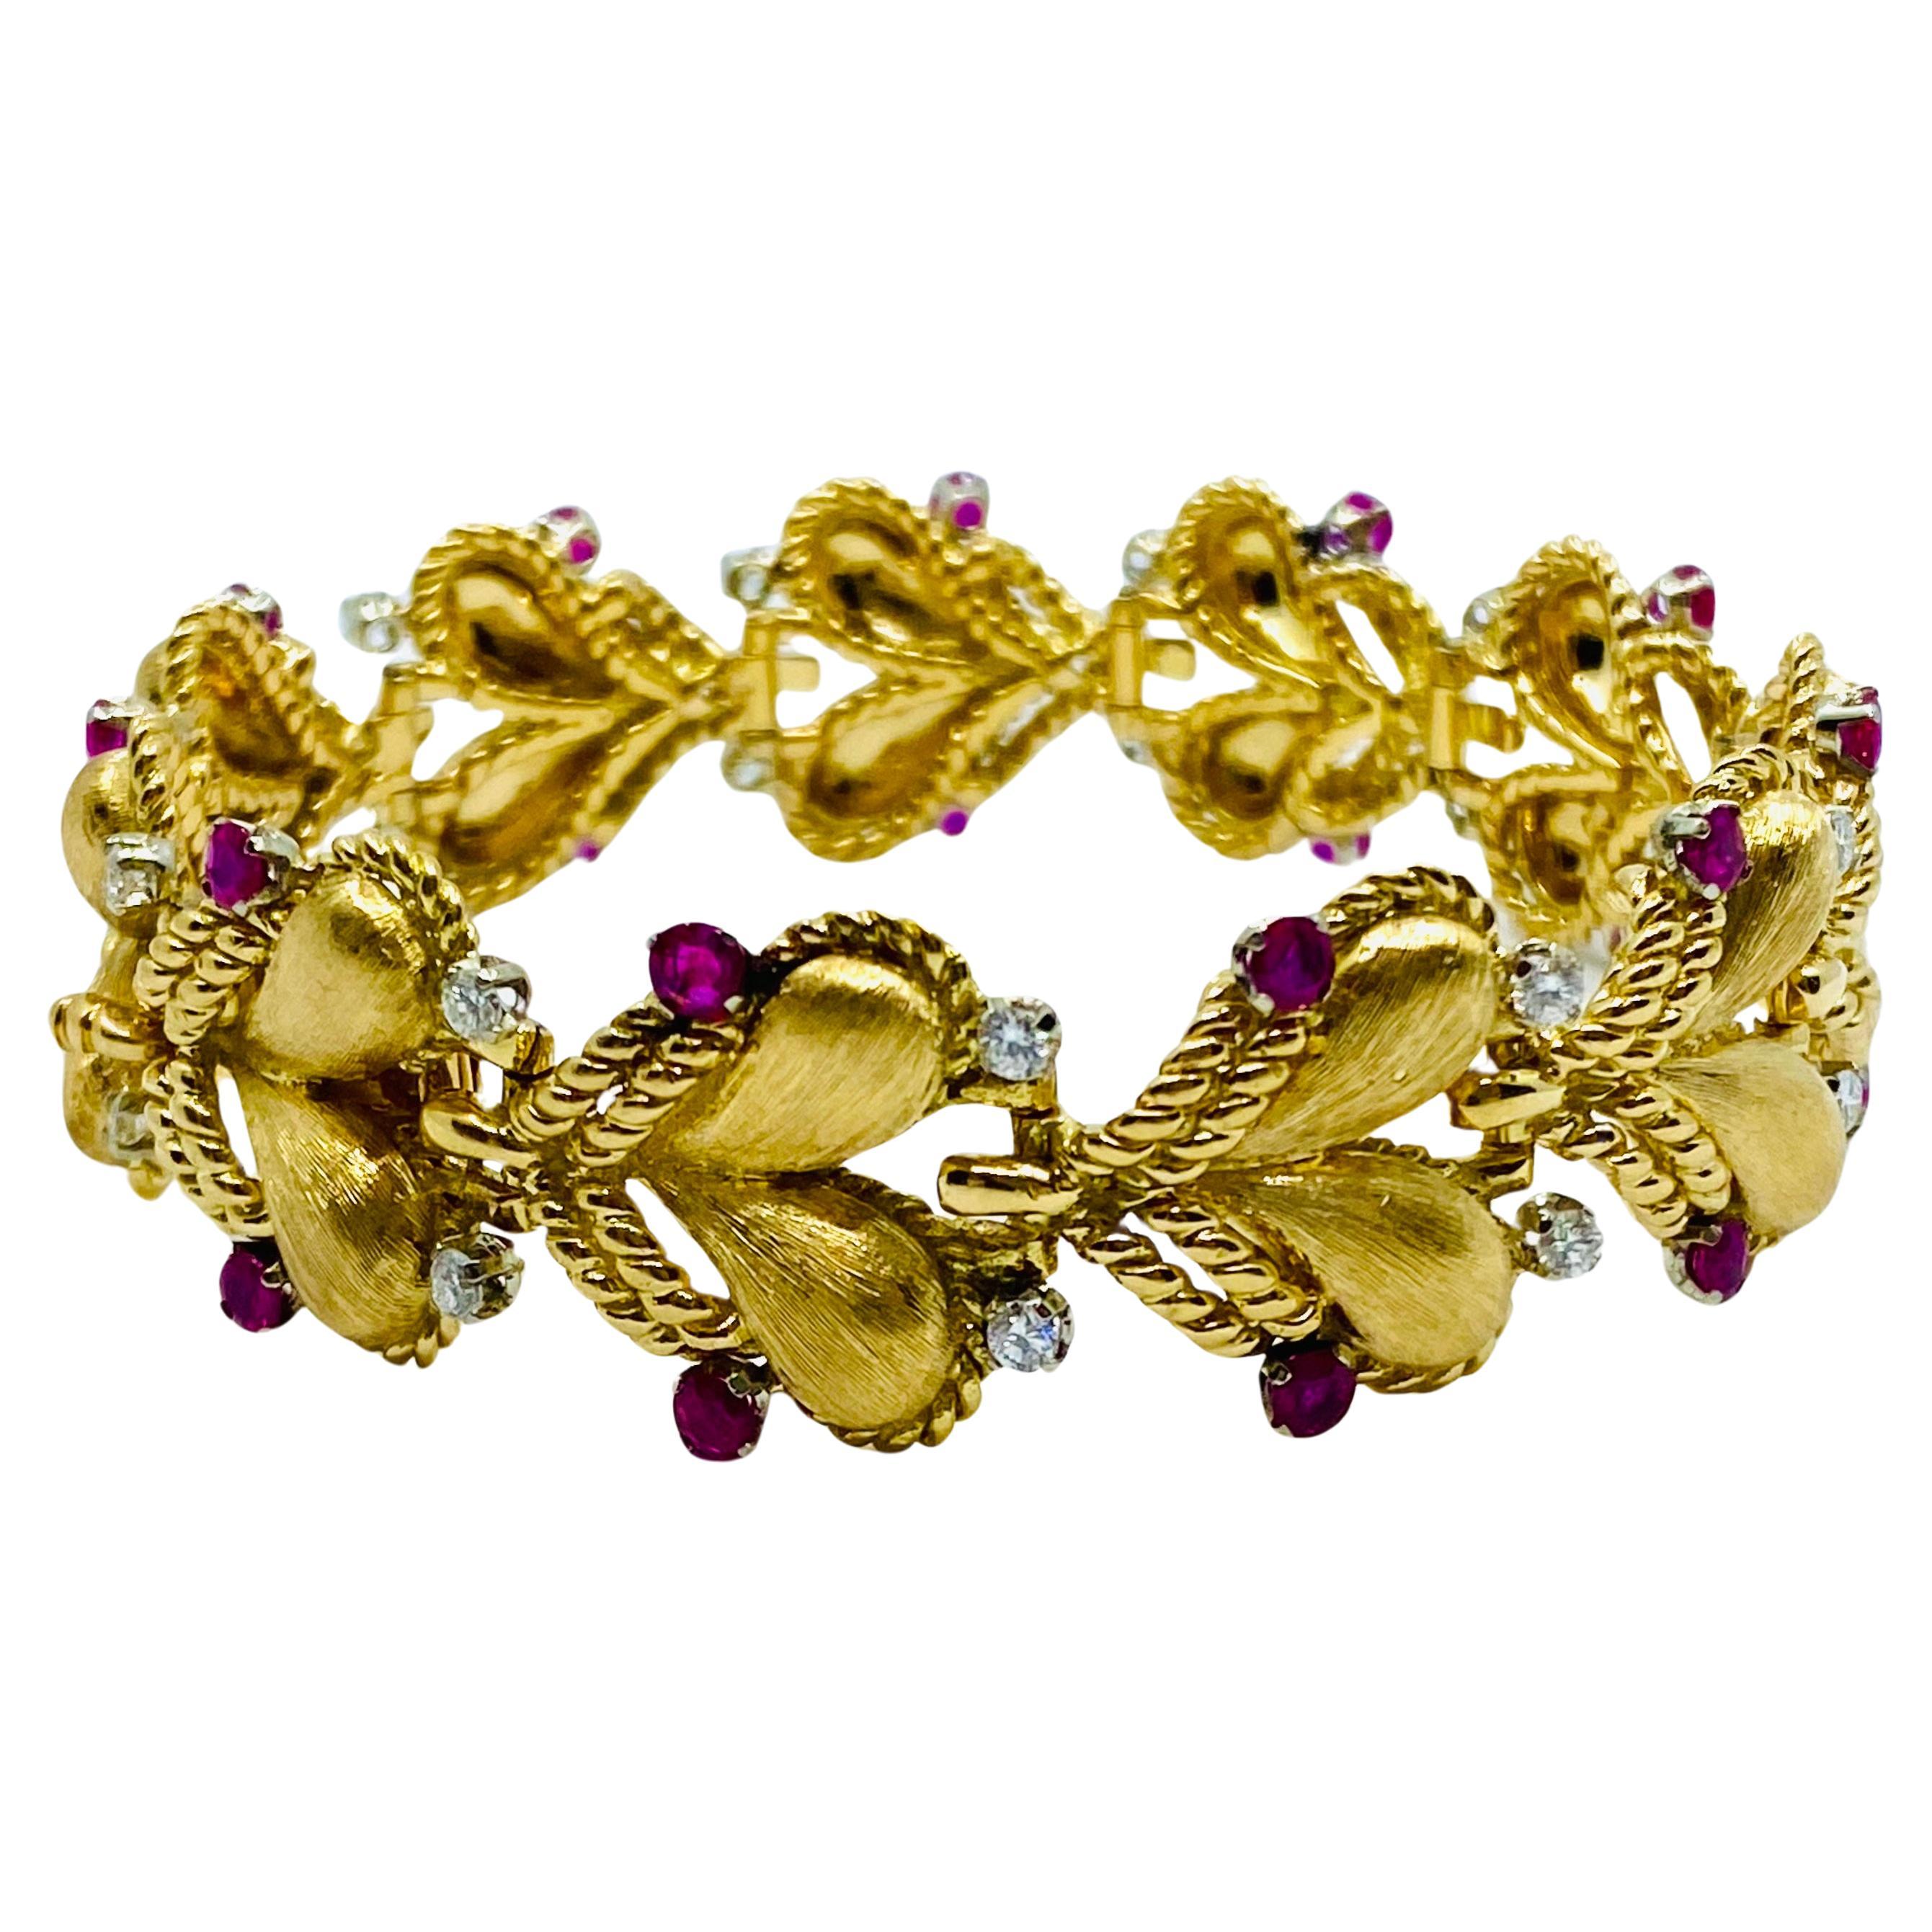 Mario Buccellati Gold Heart Design Bracelet with Gemstones In Excellent Condition For Sale In Beverly Hills, CA